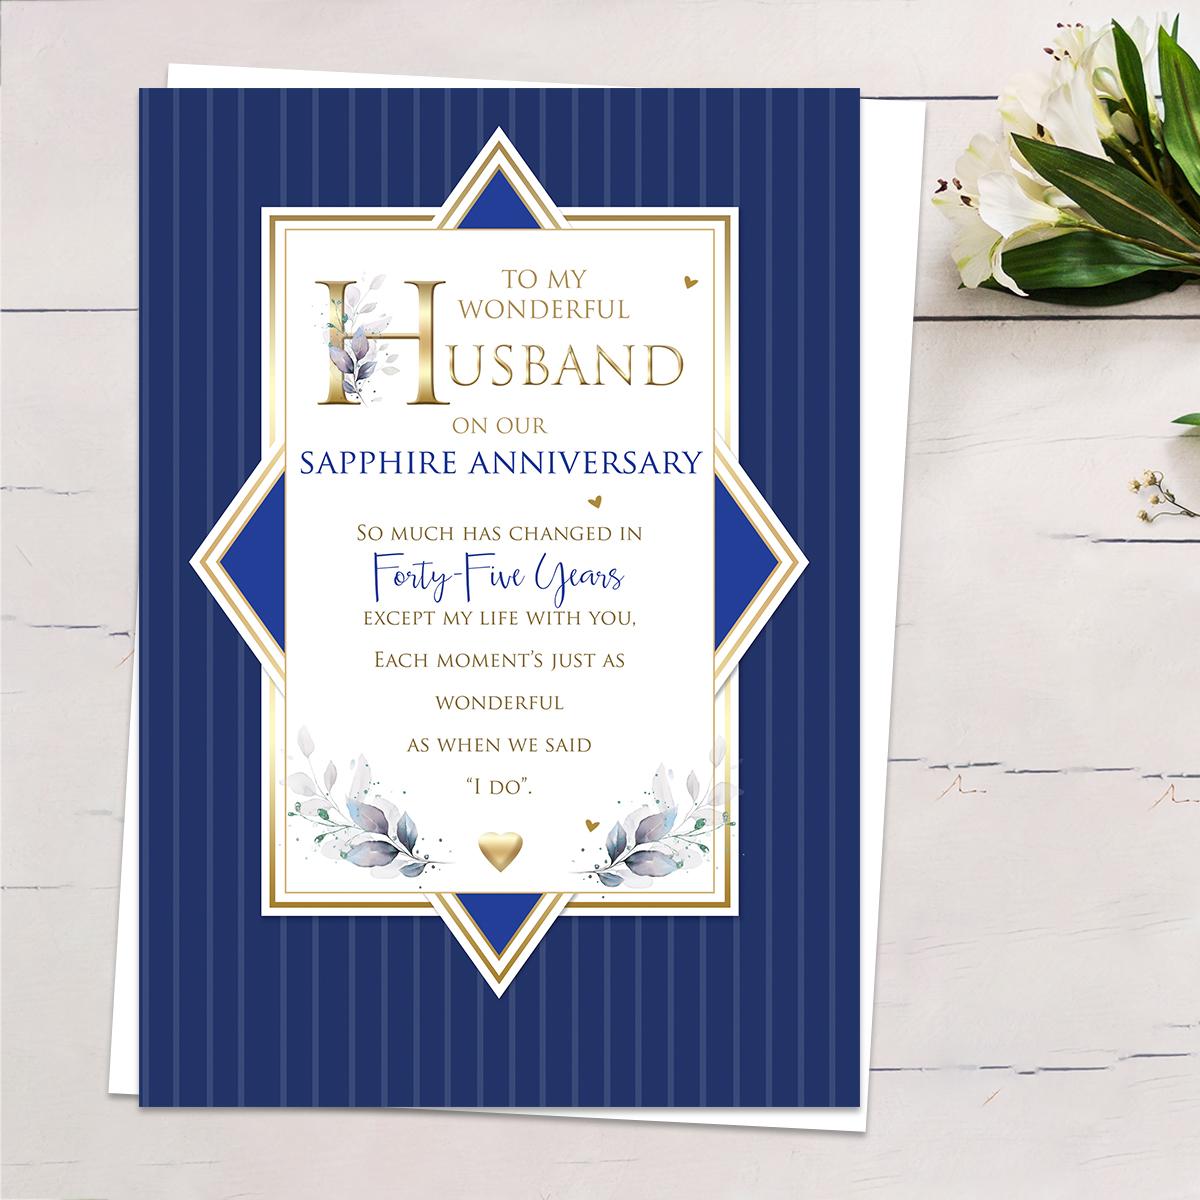 'To My Wonderful Husband On Our Sapphire Anniversary' Featuring A Navy Blue Front With Heartfelt Words Edged In Gold Foiling. Complete With White Envelope